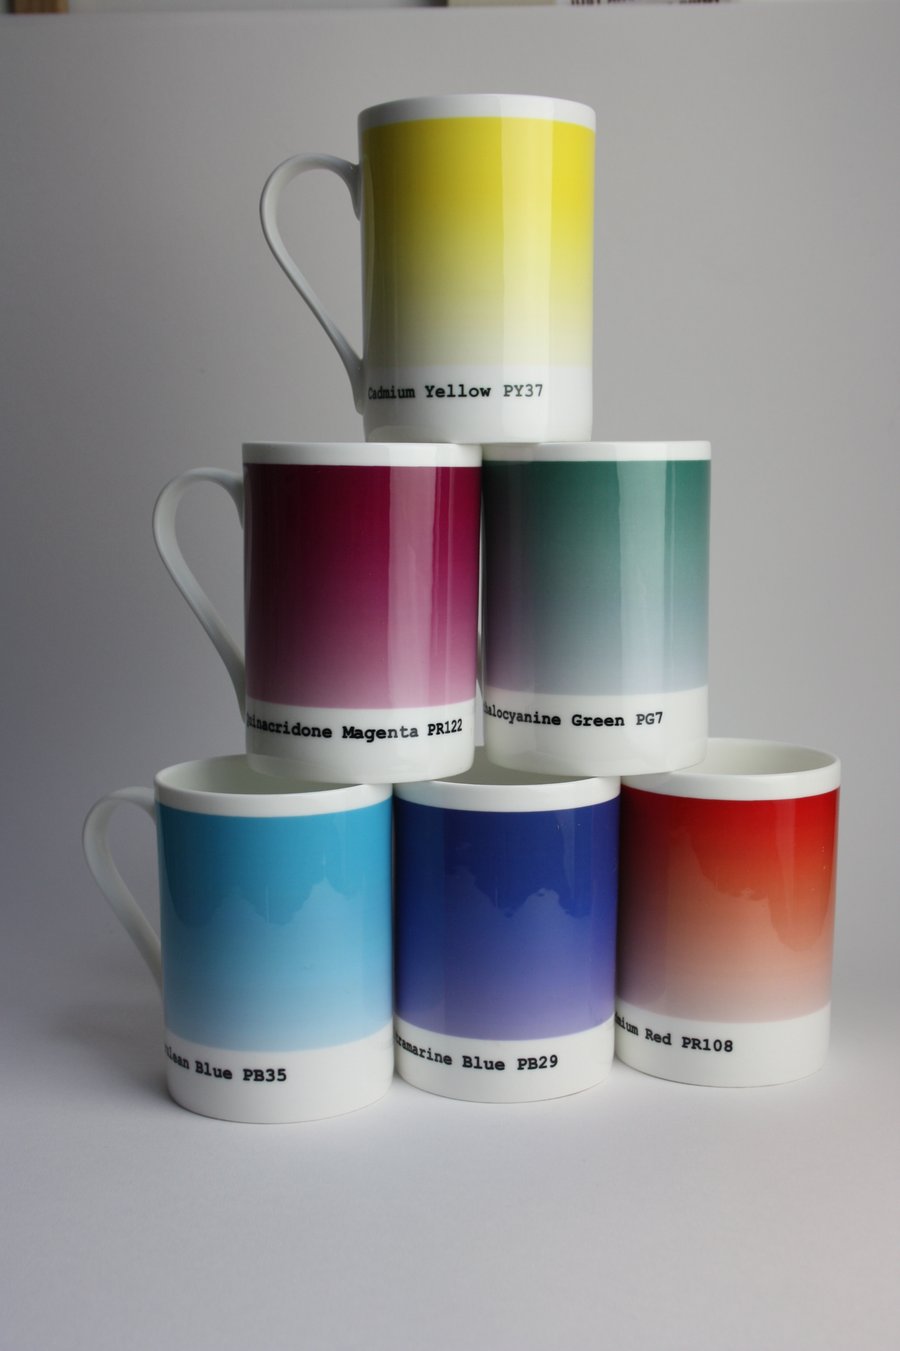 Coloured Mugs - matched to watercolour pigments